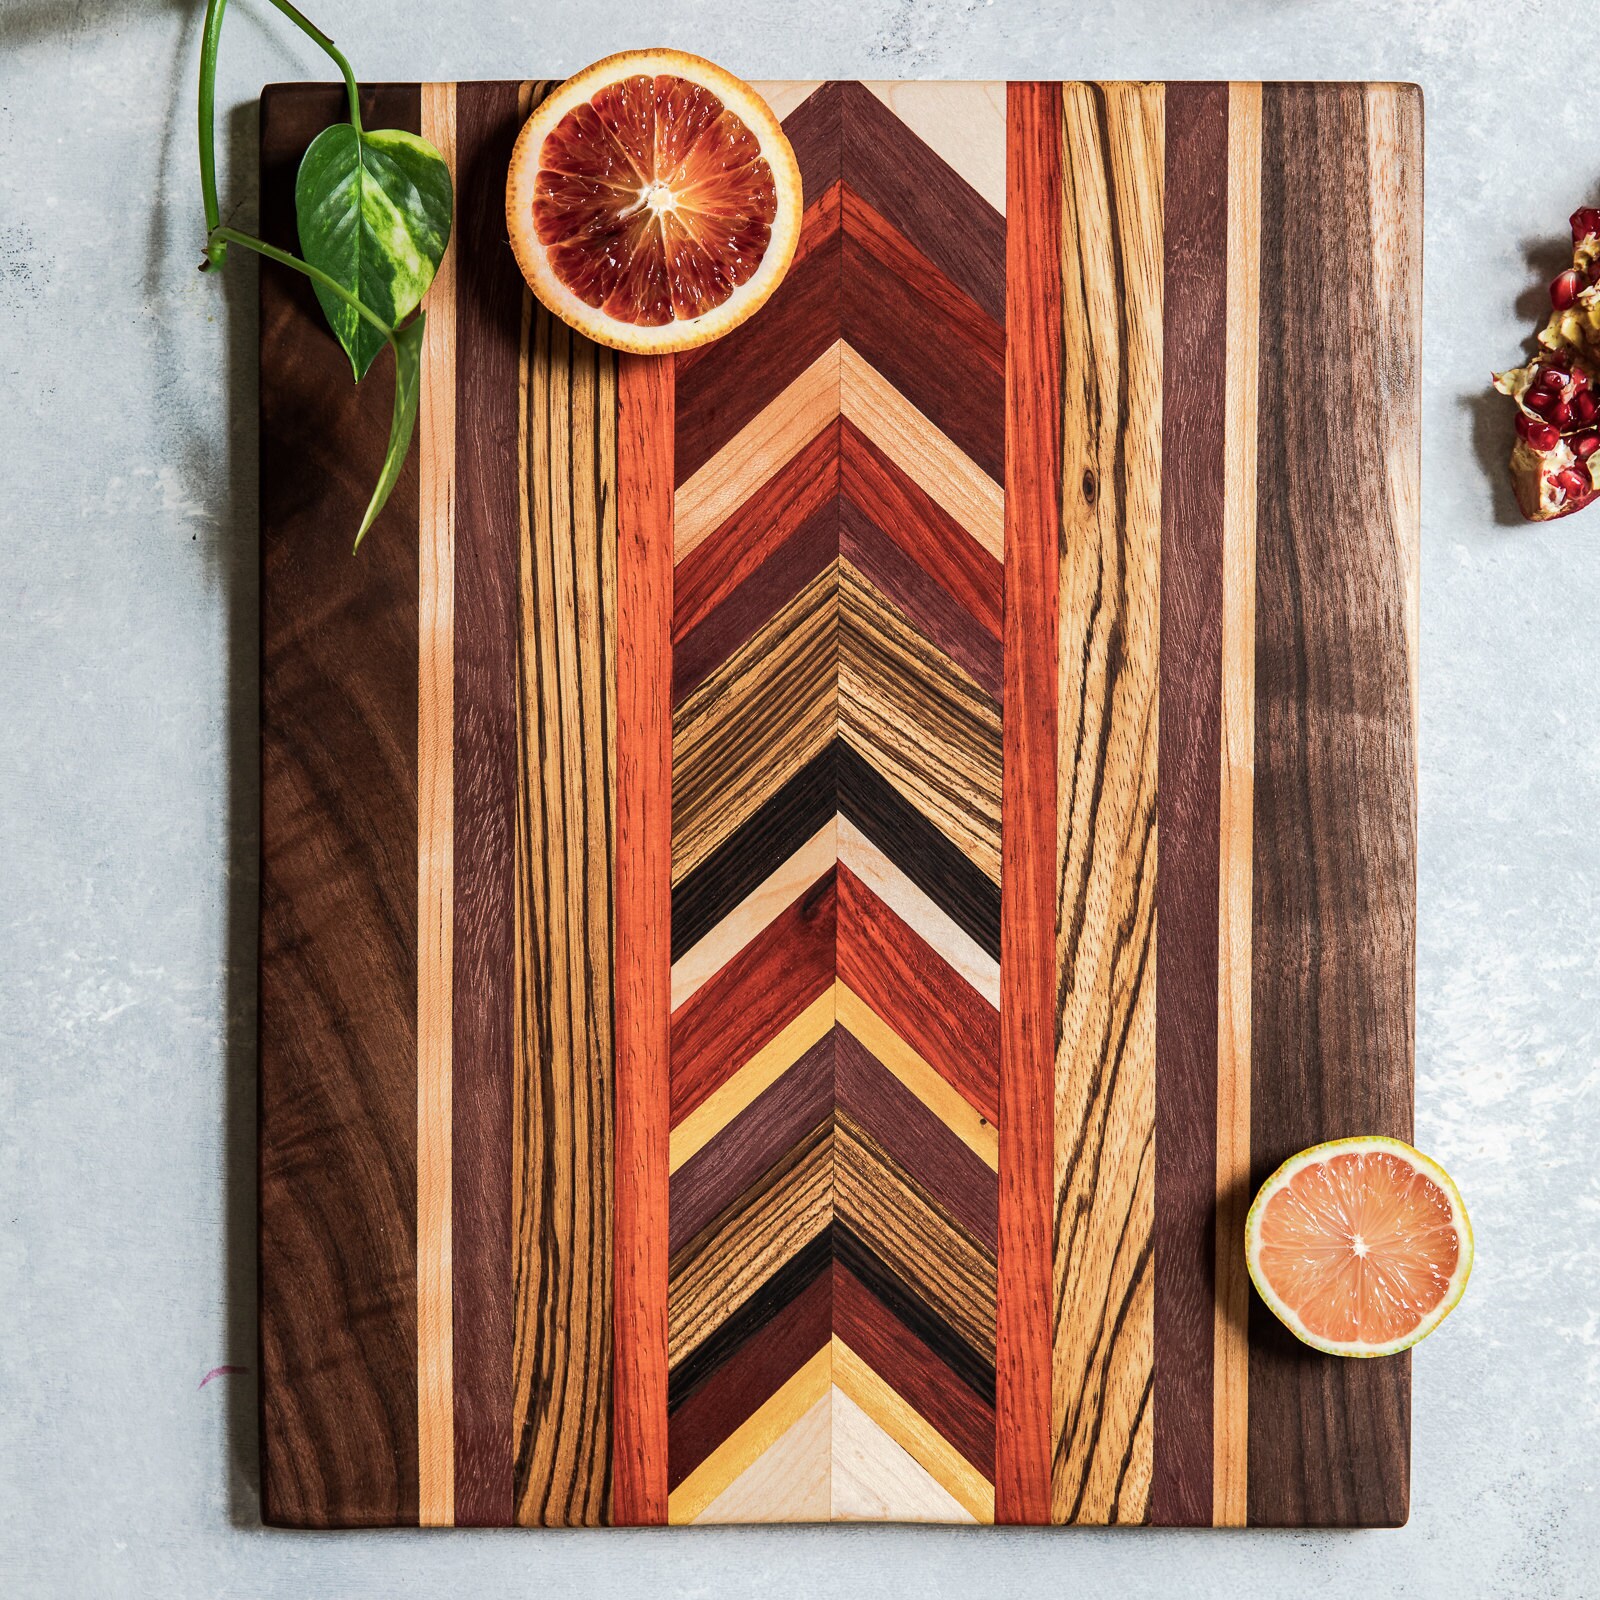 Large Exotic Wood Cutting Board by Honorable Oak